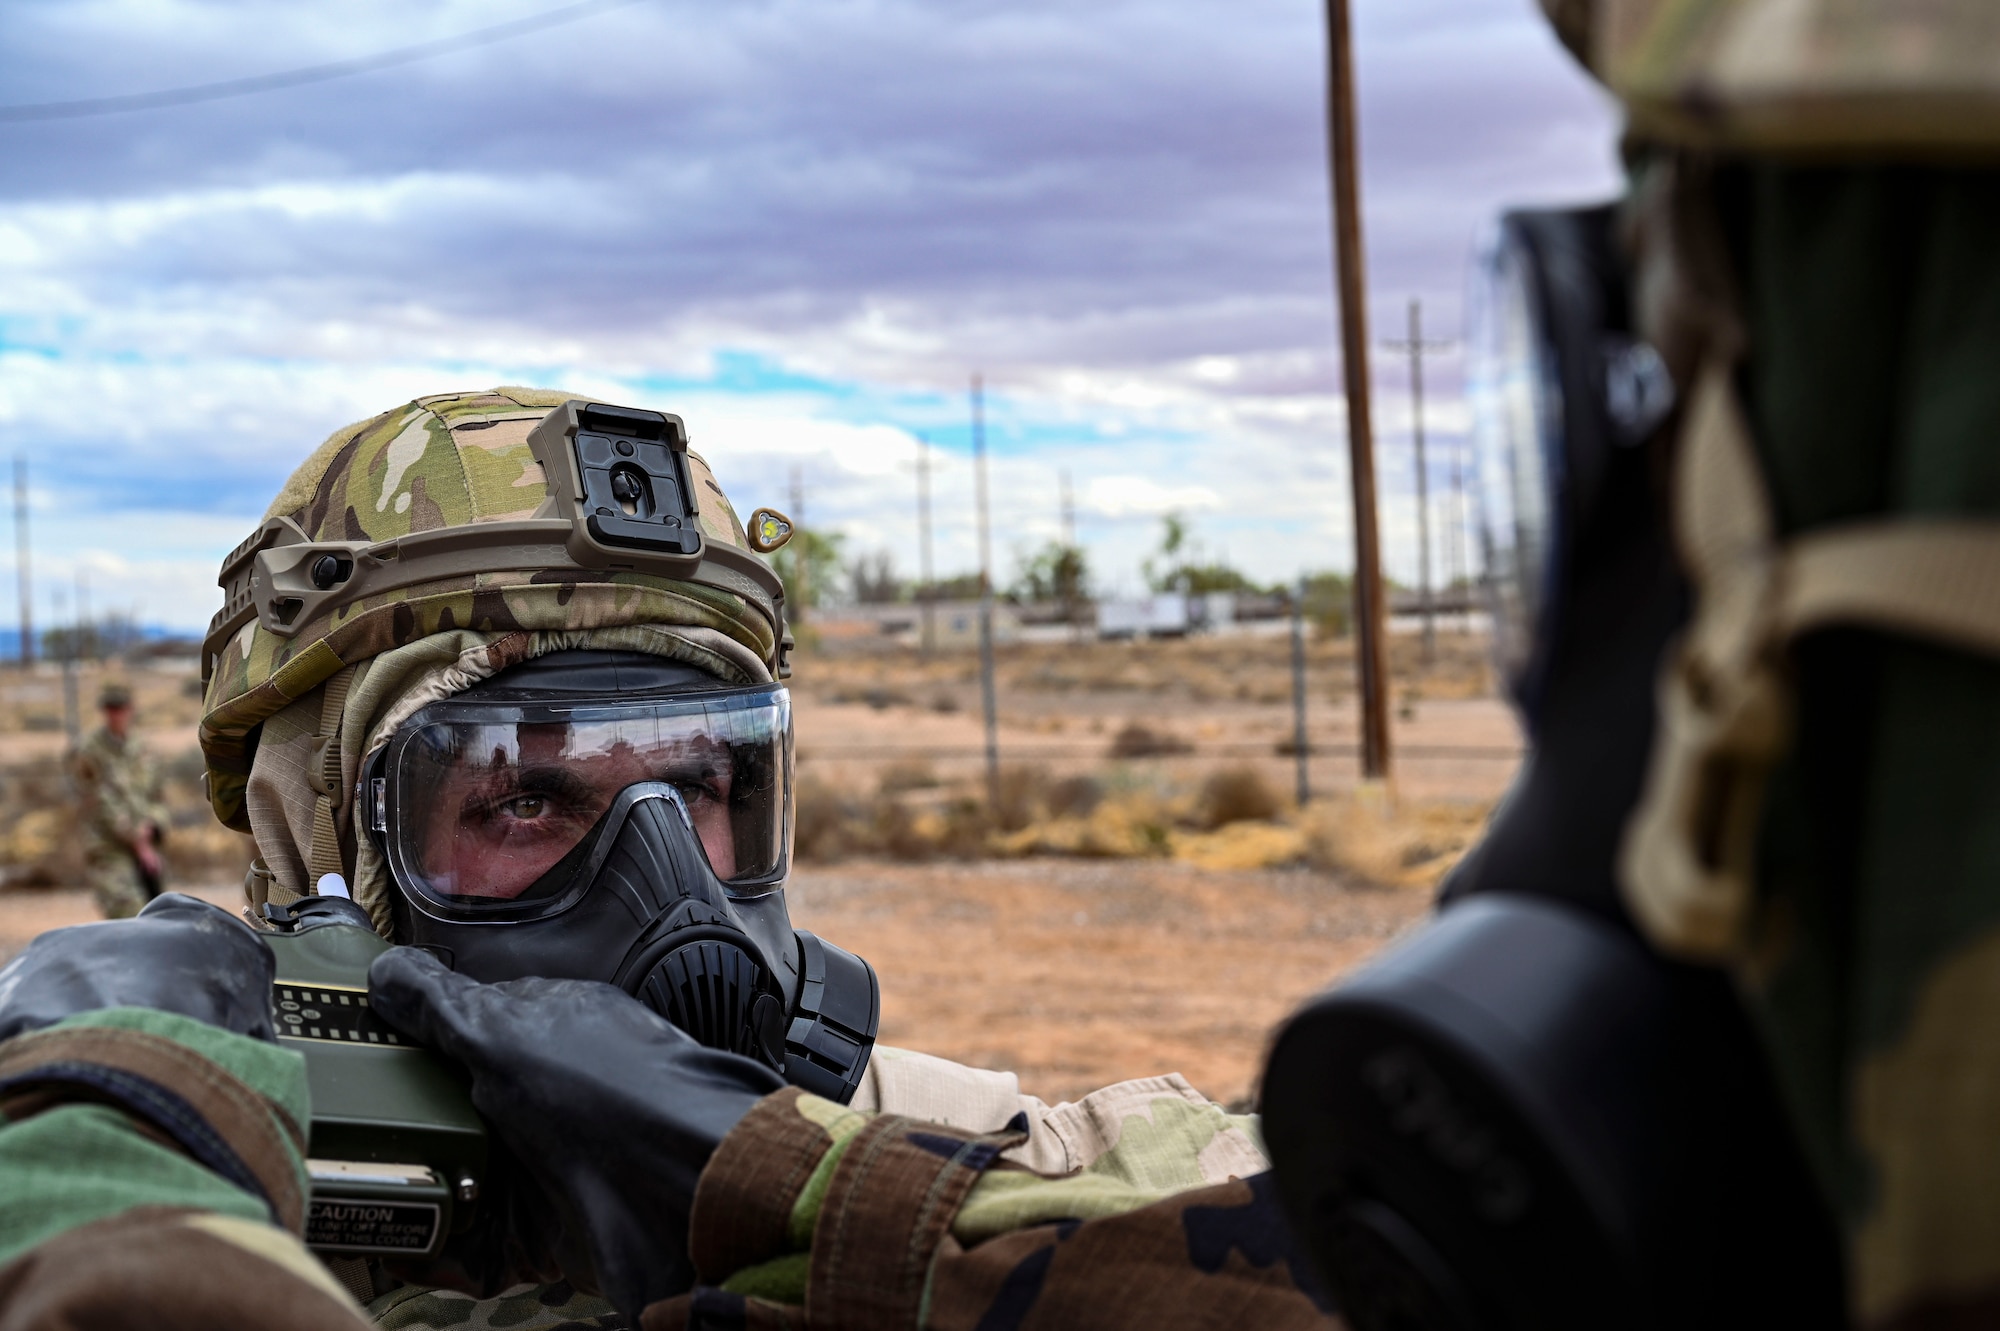 U.S. Air Force Airman 1st Class Spencer Pettingill, 49th Civil Engineer Squadron explosive ordnance disposal apprentice, is checked for any signs of hazardous material during a chemical munition decontamination exercise at Holloman Air Force Base, New Mexico, March 23, 2023. The 49th CES EOD flight constantly trains for different scenarios to better prepare for any extreme situations that they may encounter. (U.S Air Force photo by Airman 1st Class Isaiah Pedrazzini)